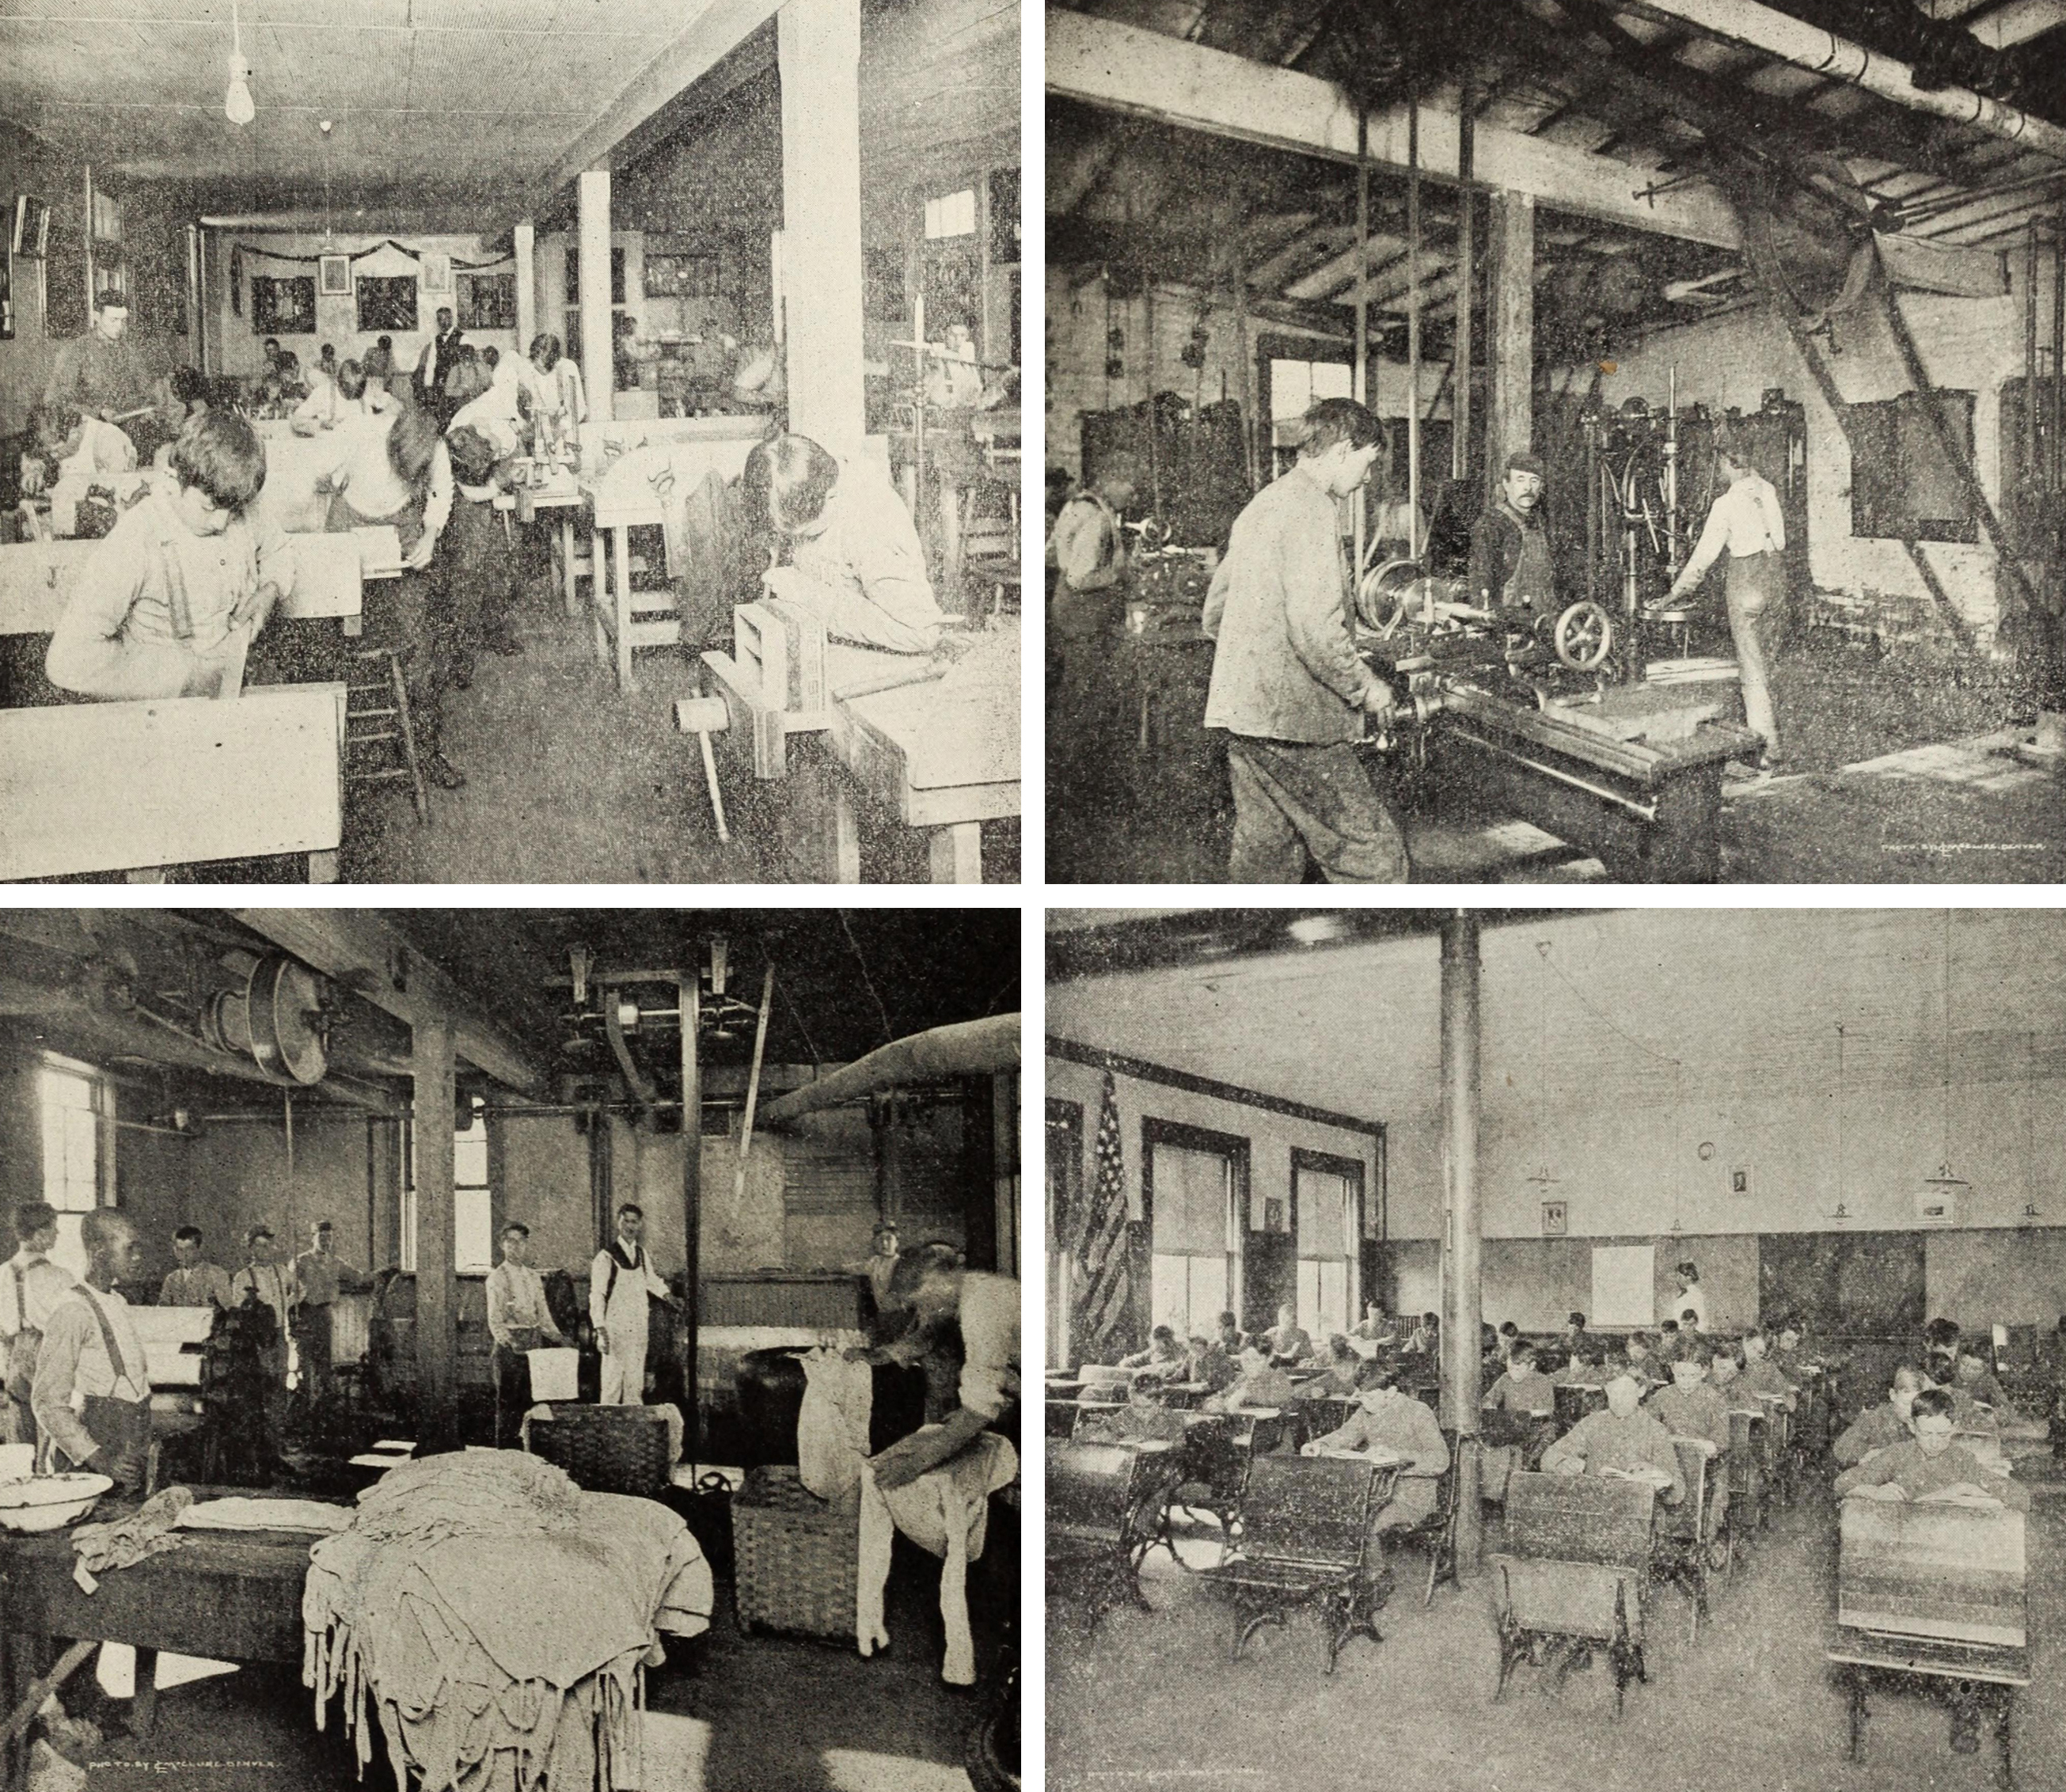 Woodworkers in the manual training department, top left, The machine shop, top right, the laundry facility, bottom left, and the seventh grade school room, bottom right, at the Colorado State Industrial School for Boys in Golden, Colorado. (Colorado State Industrial School Thirteenth Biennial Report, 1905-06)